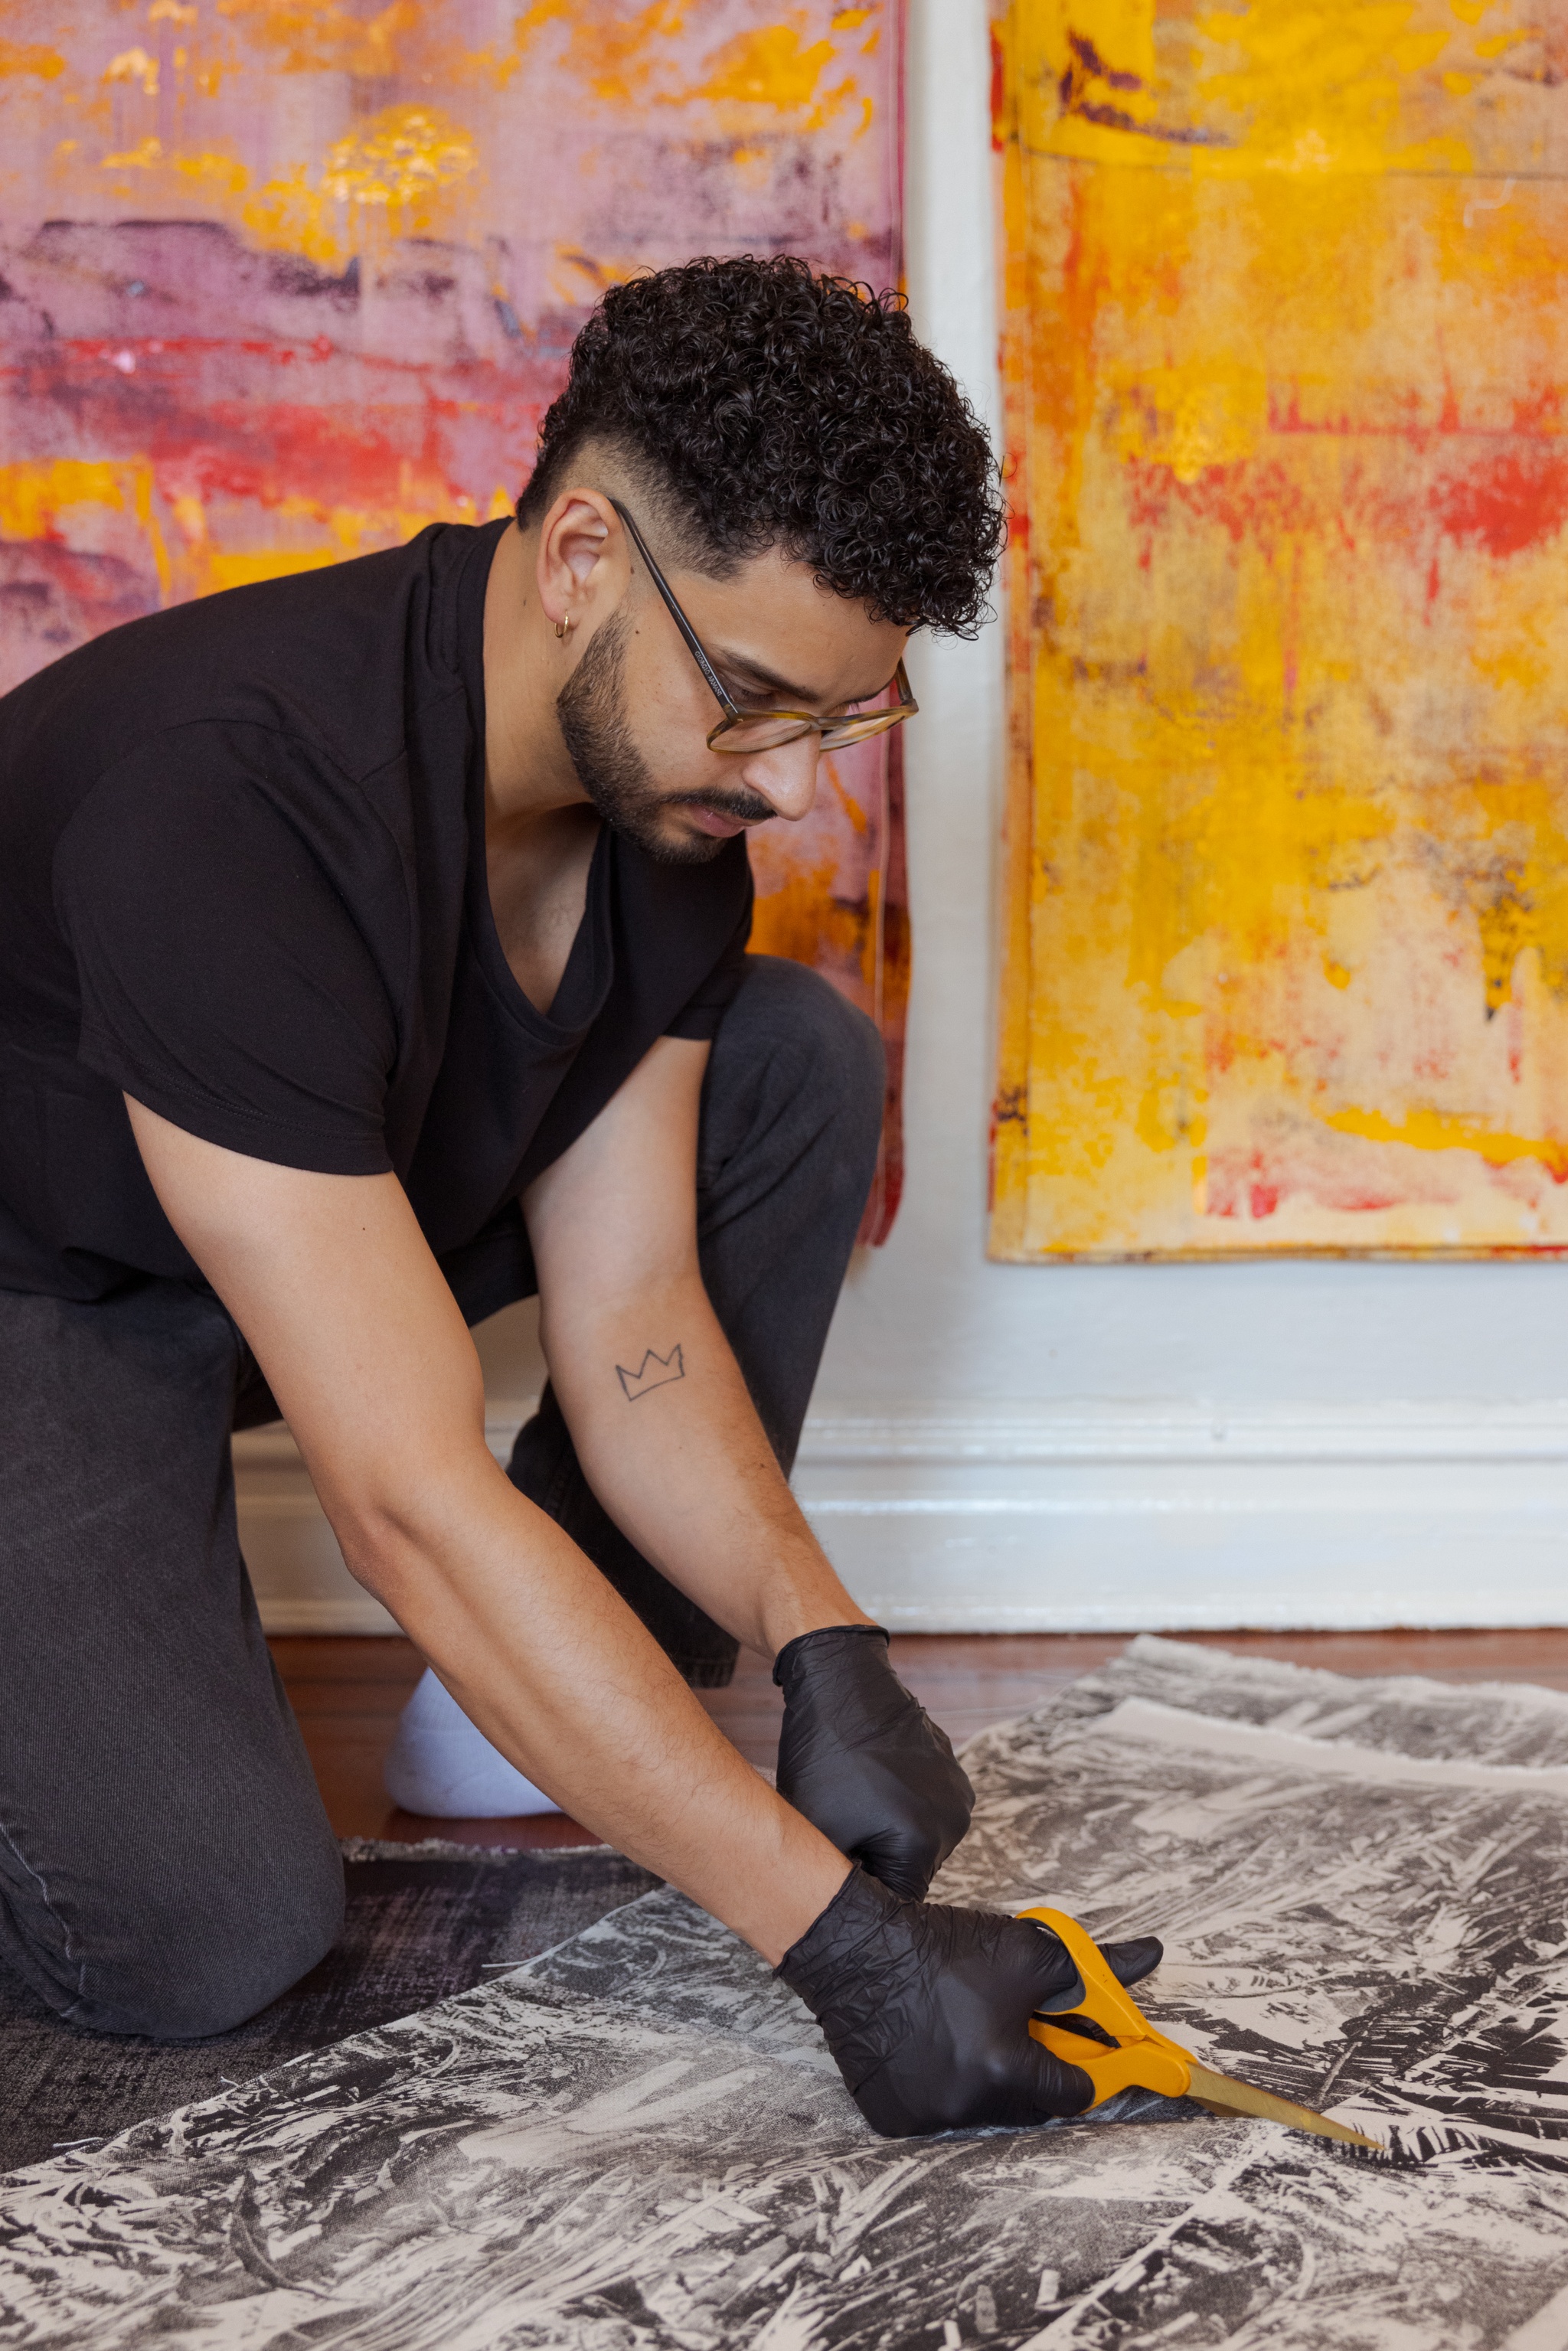 The artist Luis A. Gutierrez is seen crouching over printed canvas fabric laid on the floor. He is cutting the fabric down the middle with orange scissors.